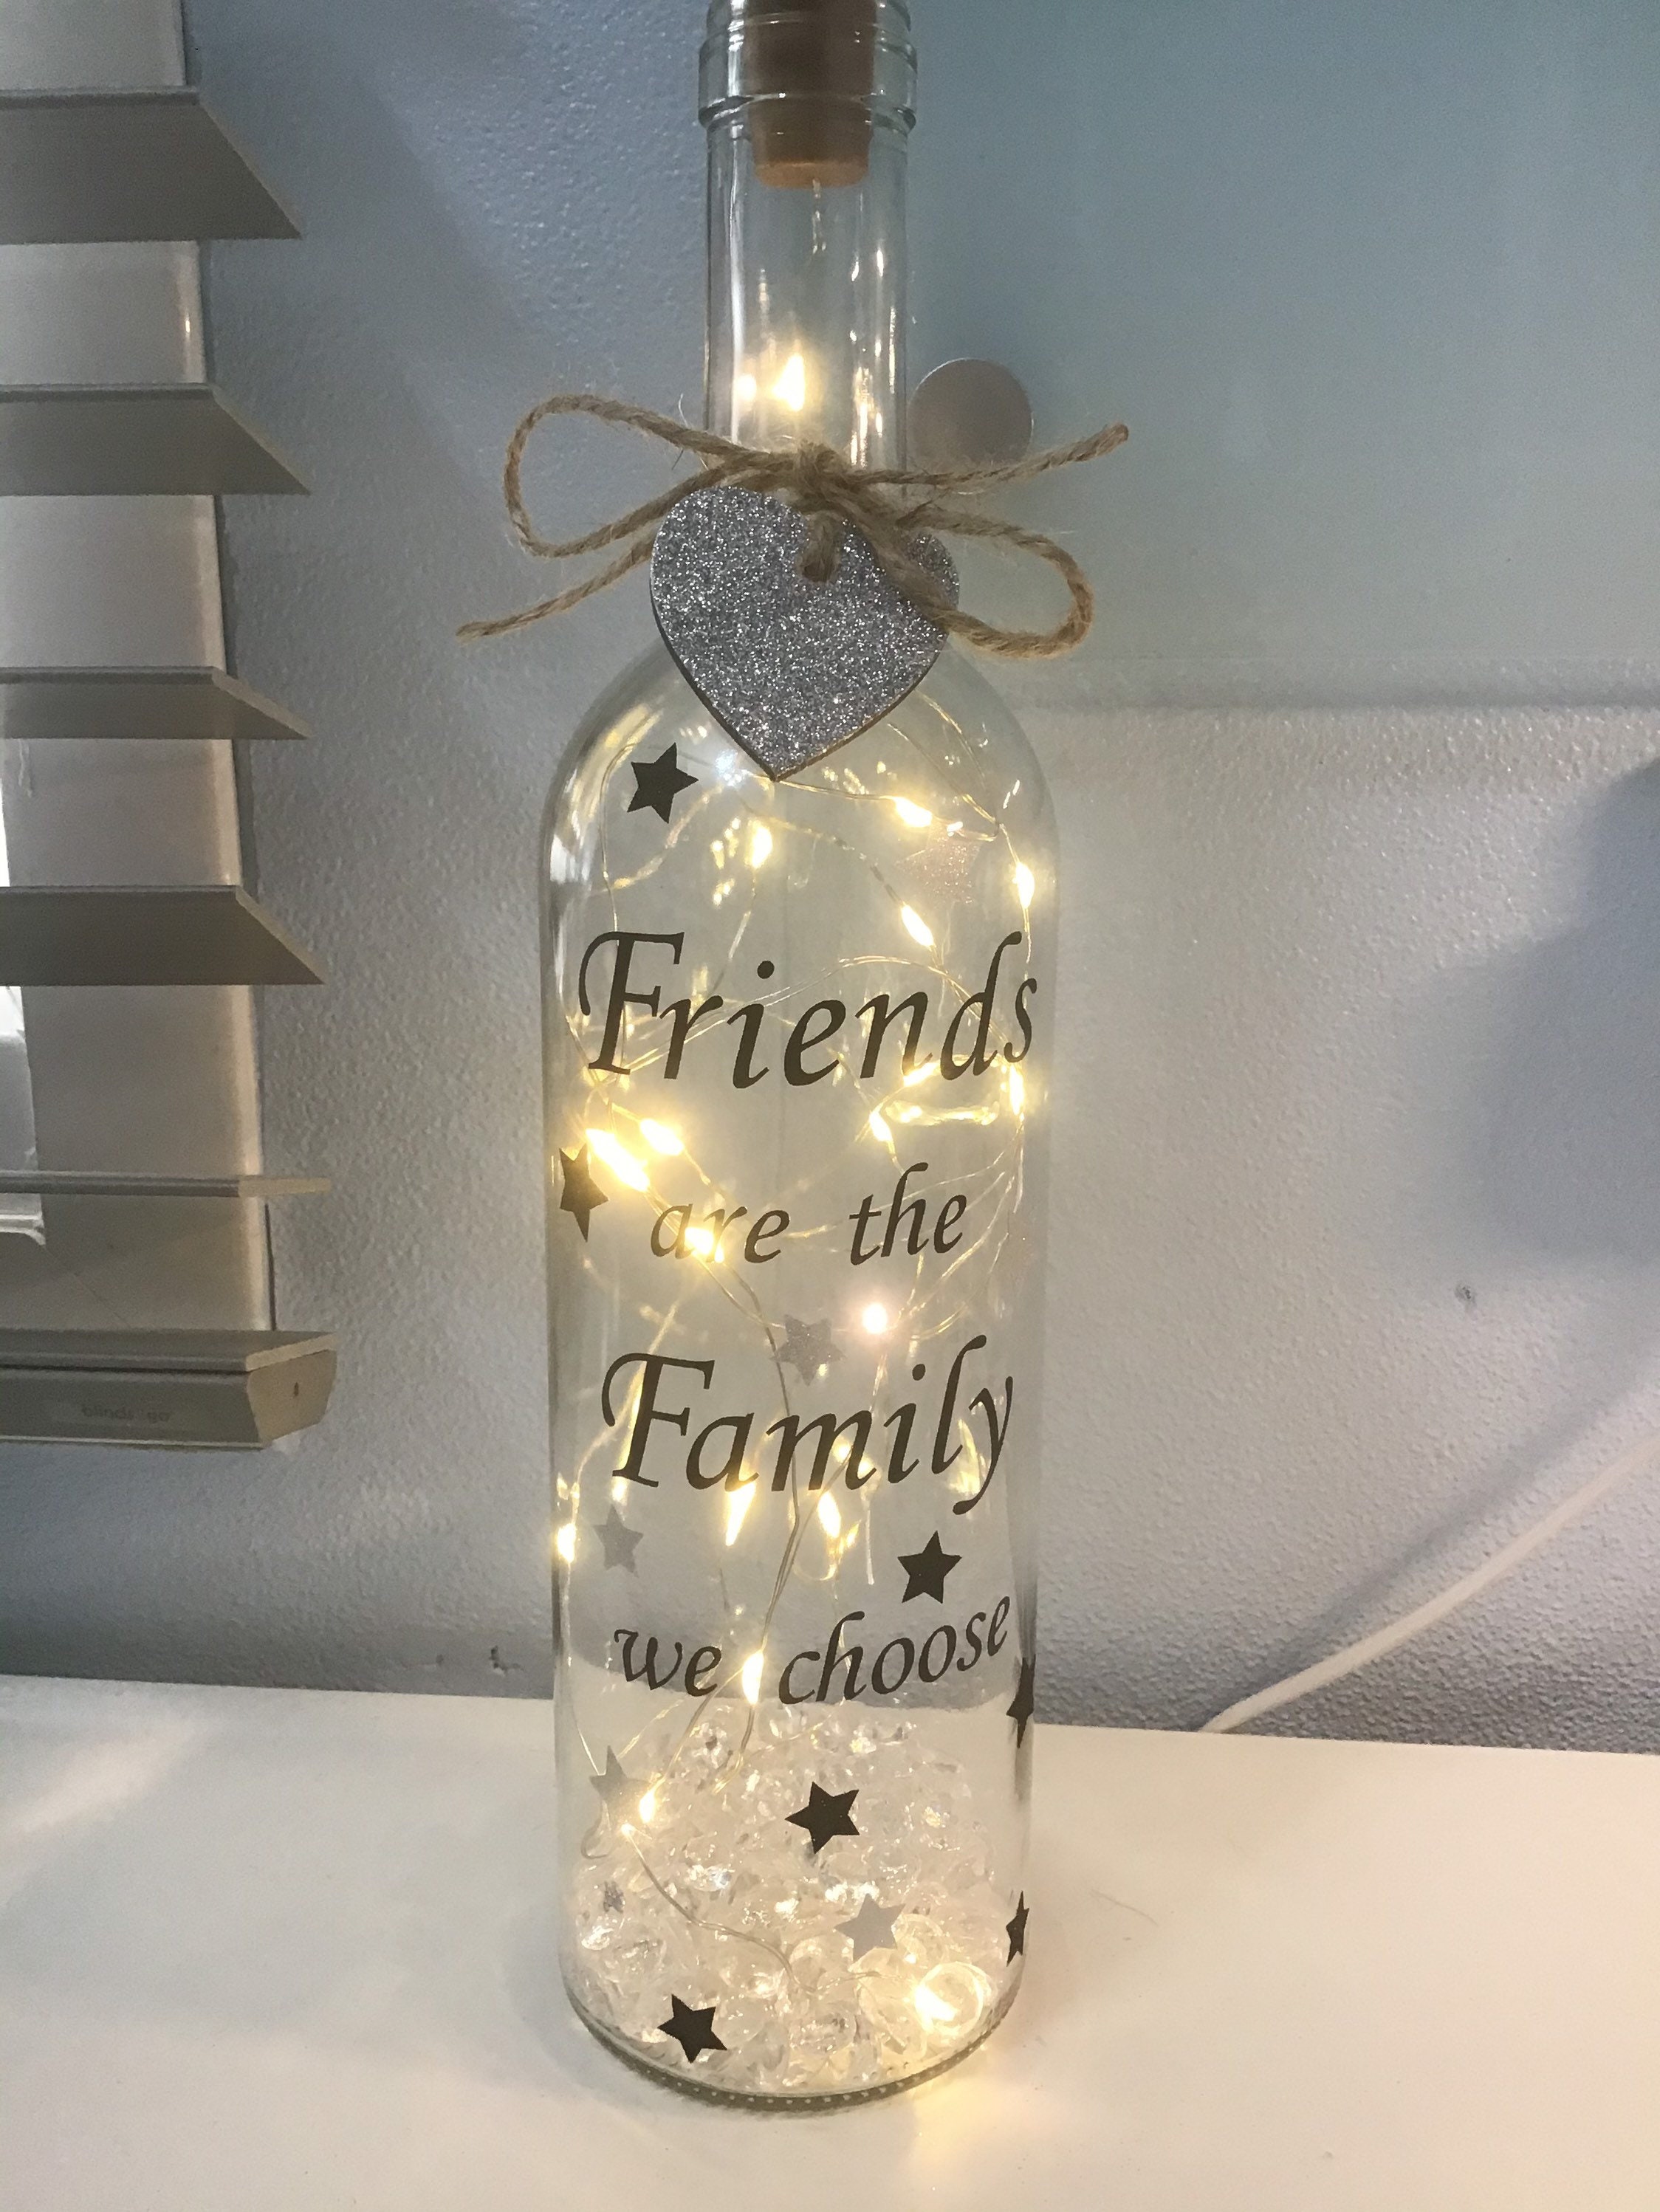 Friends are the Family we choose quote light up wine bottle | Etsy